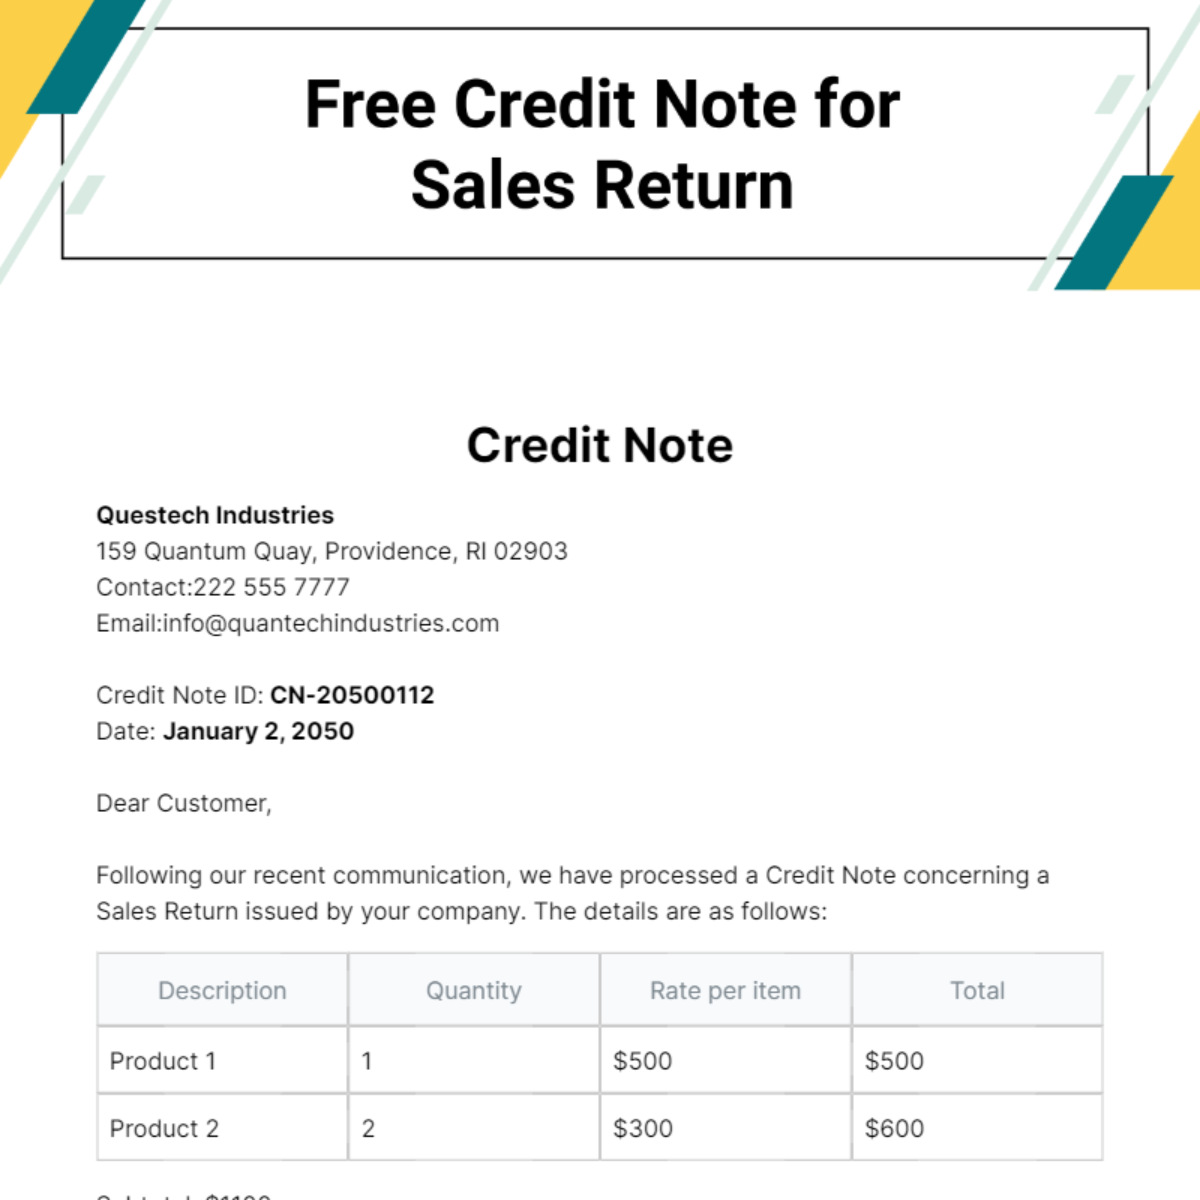 Credit Note for Sales Return Template